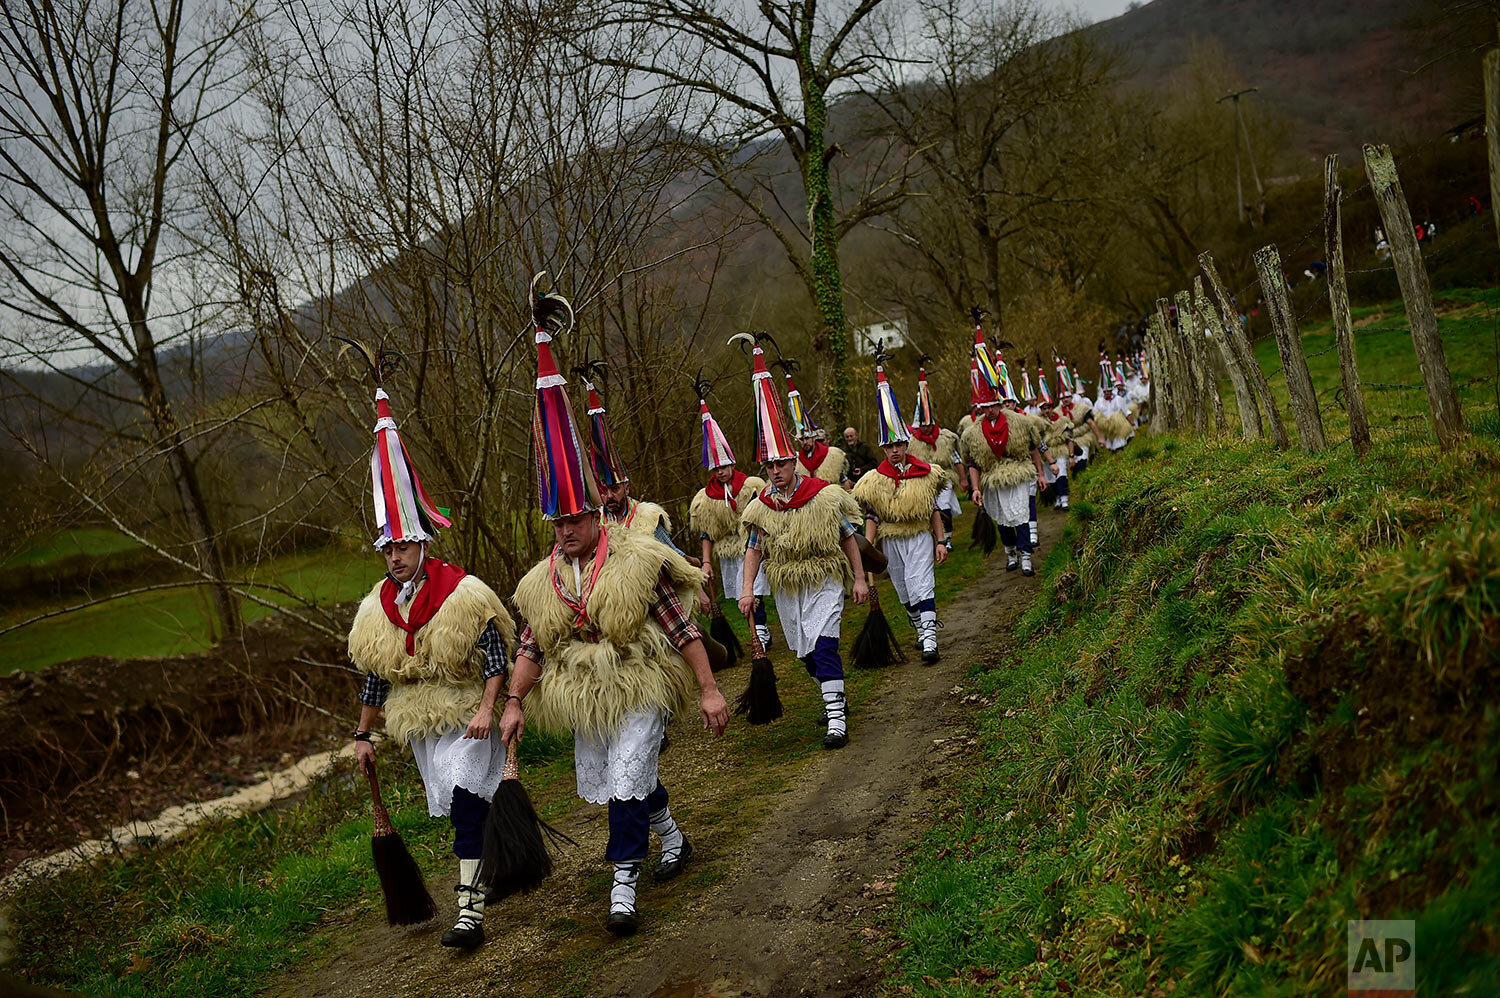  In this Monday, Jan. 27, 2020 photo, ''Joaldunak'' march along a path as they take part in a Carnival in the small Pyrenees village of Ituren, northern Spain.  (AP Photo/Alvaro Barrientos) 